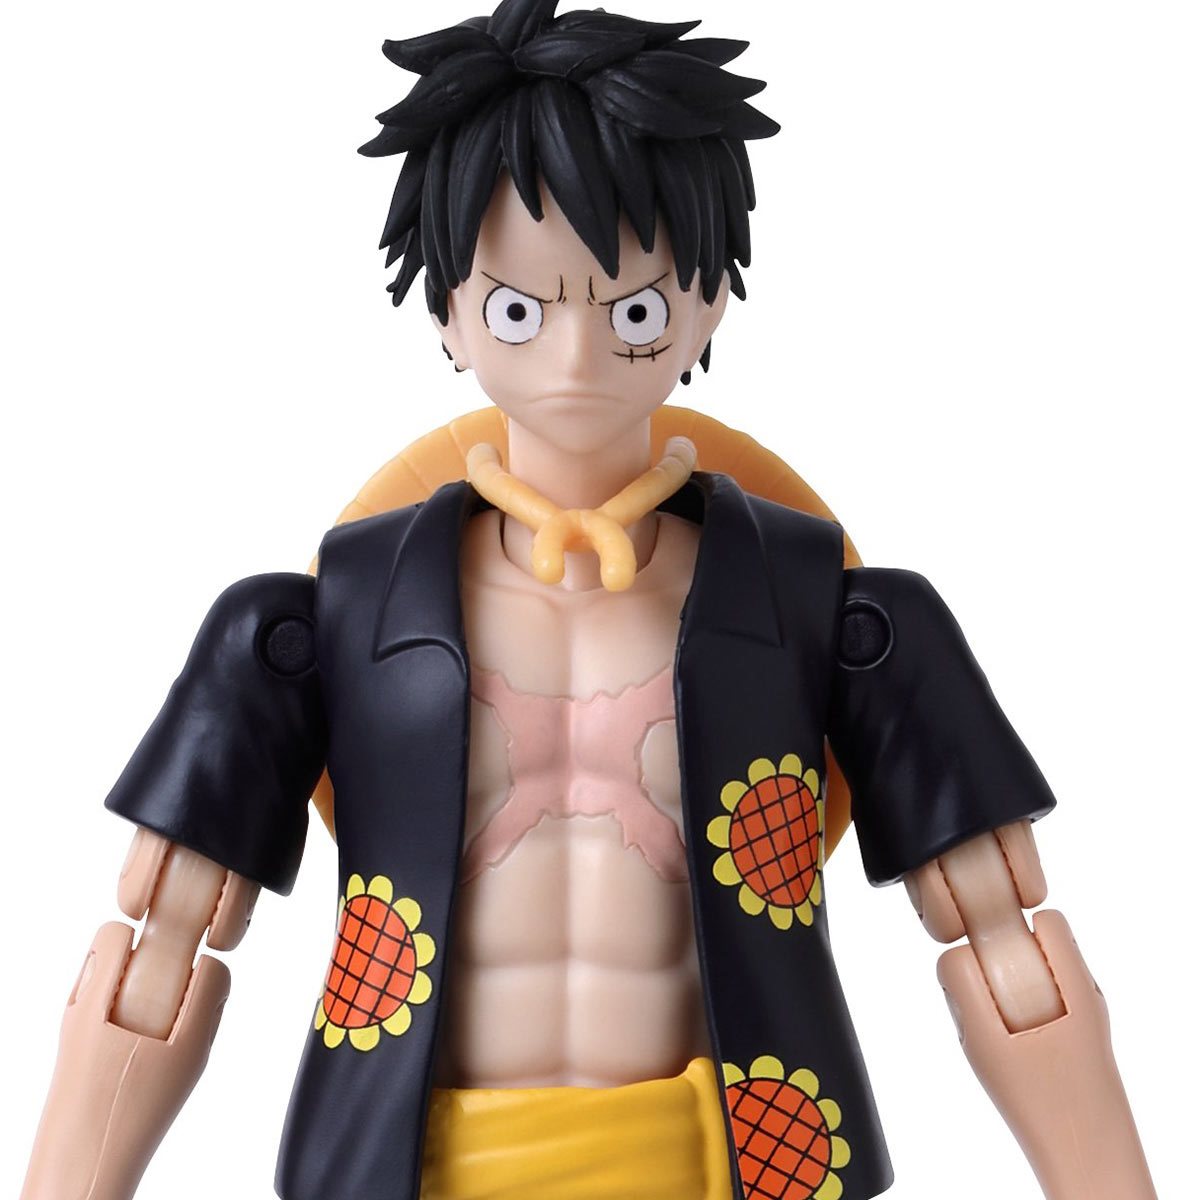 One Piece Anime Heroes Monkey D. Luffy